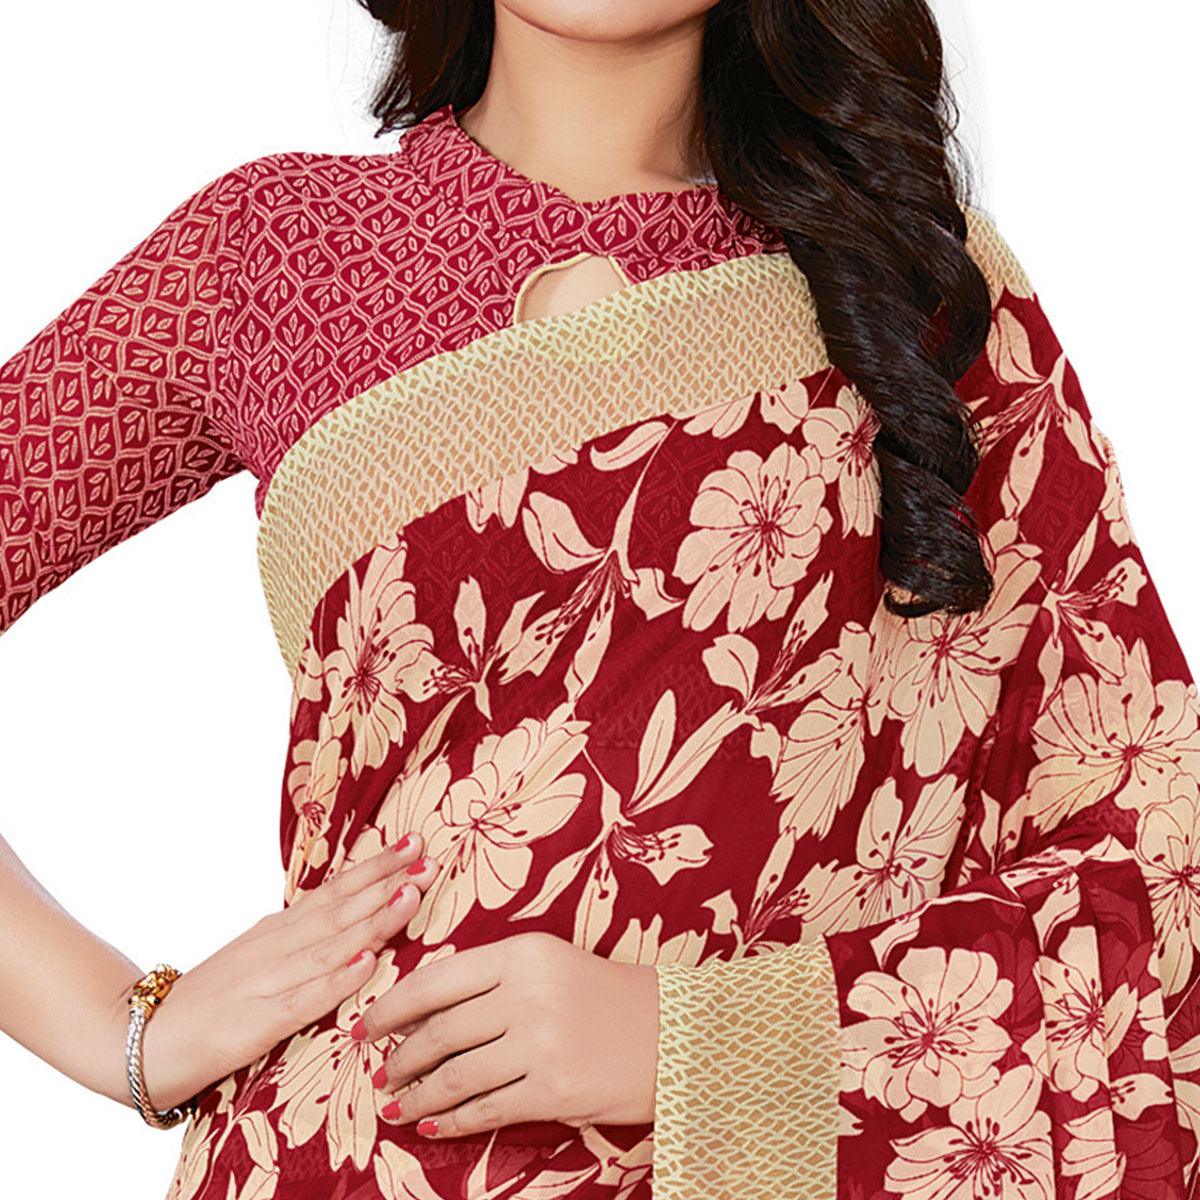 Groovy Red Colored Casual Wear Printed Georgette Saree - Peachmode